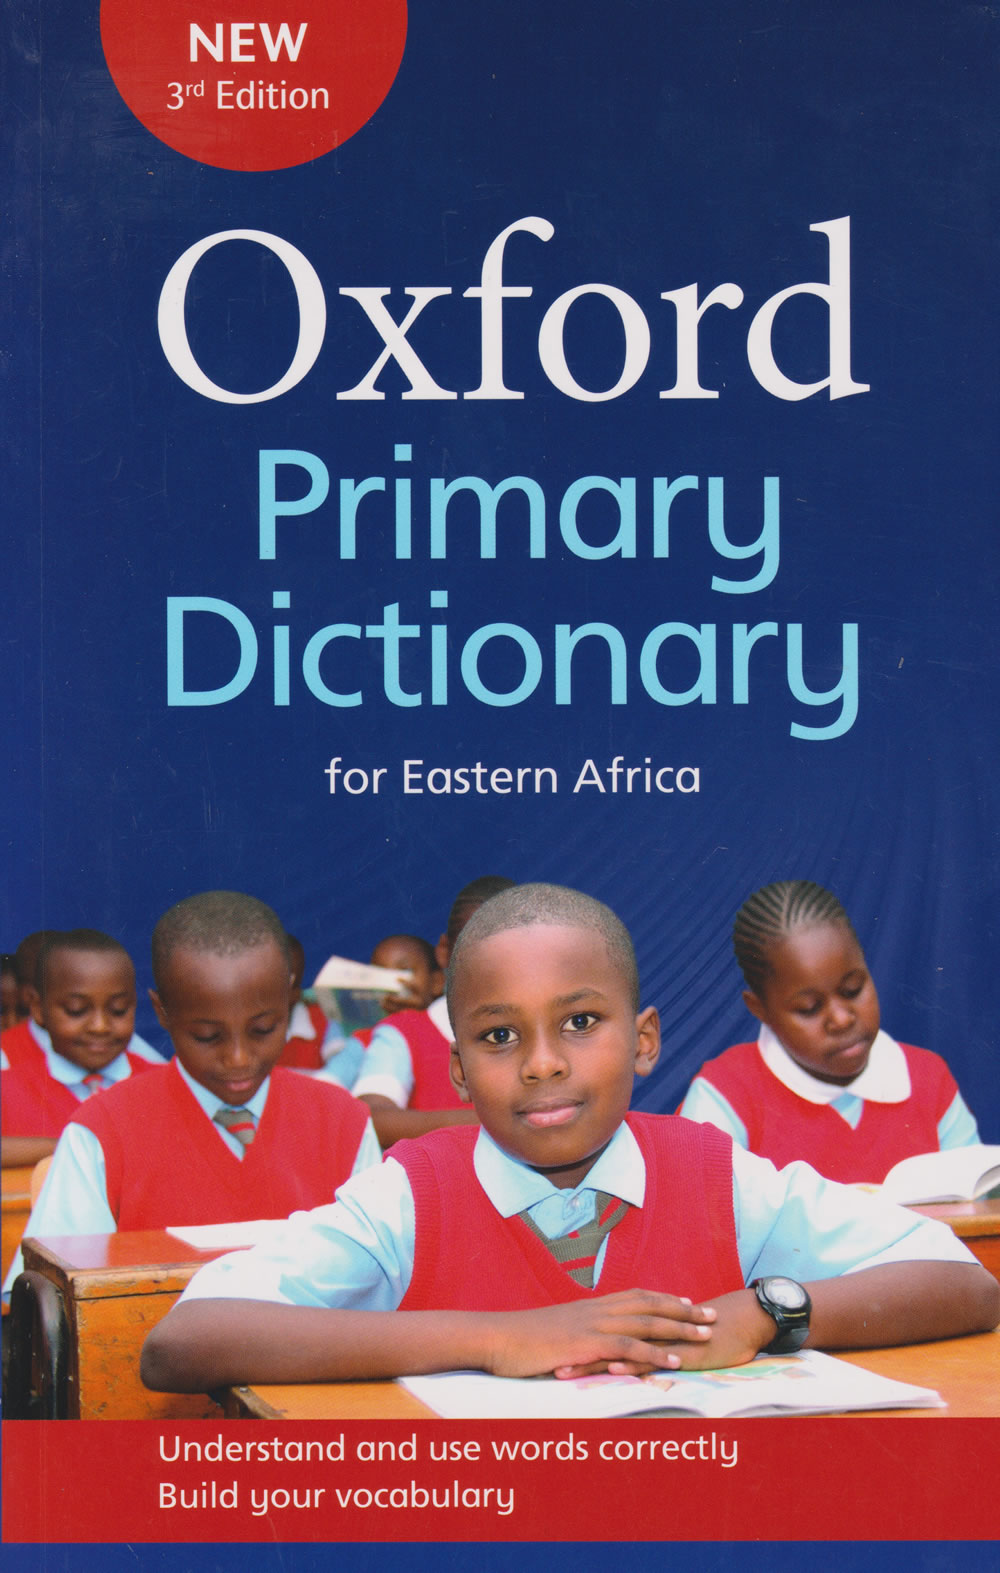 Centre　Oxford　Primary　East　Dictionary　for　Book　Africa　Text